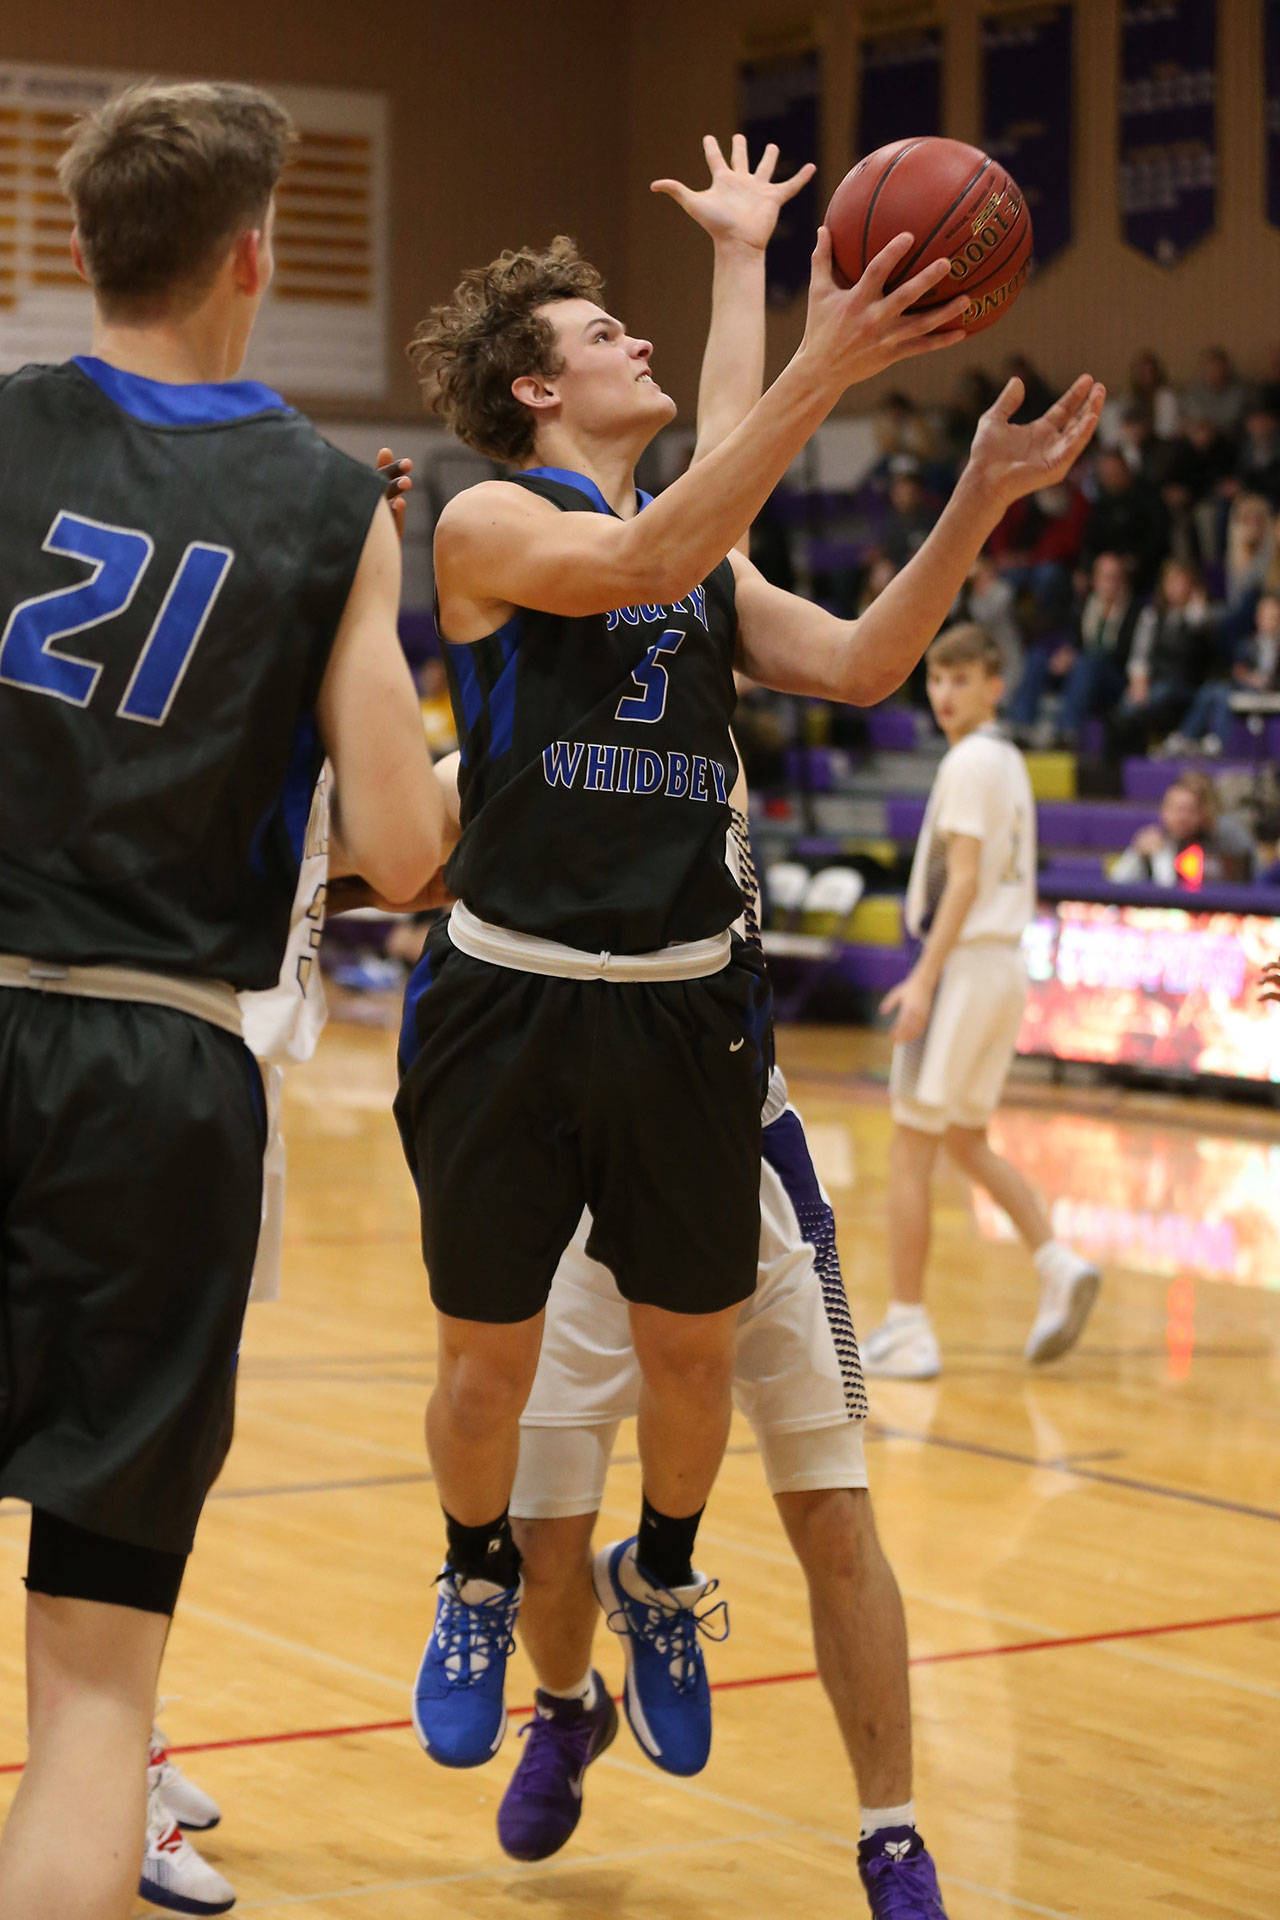 Cody Eager is fouled on the way to the basket.(Photo by John Fisken)